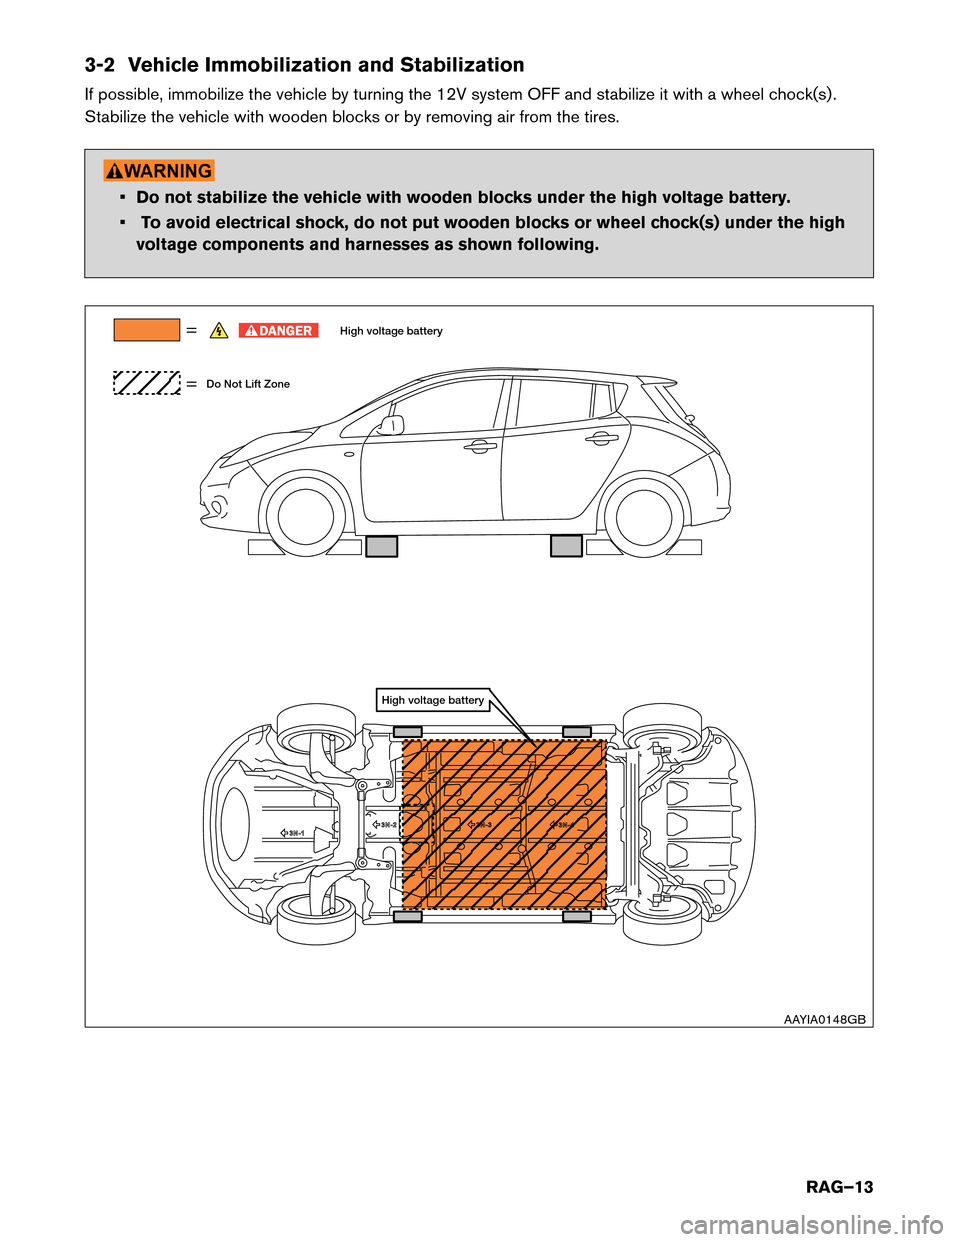 NISSAN LEAF 2016 1.G Roadside Assistance Guide 3-2 Vehicle Immobilization and Stabilization
If
possible, immobilize the vehicle by turning the 12V system OFF and stabilize it with a wheel chock(s) .
Stabilize the vehicle with wooden blocks or by r